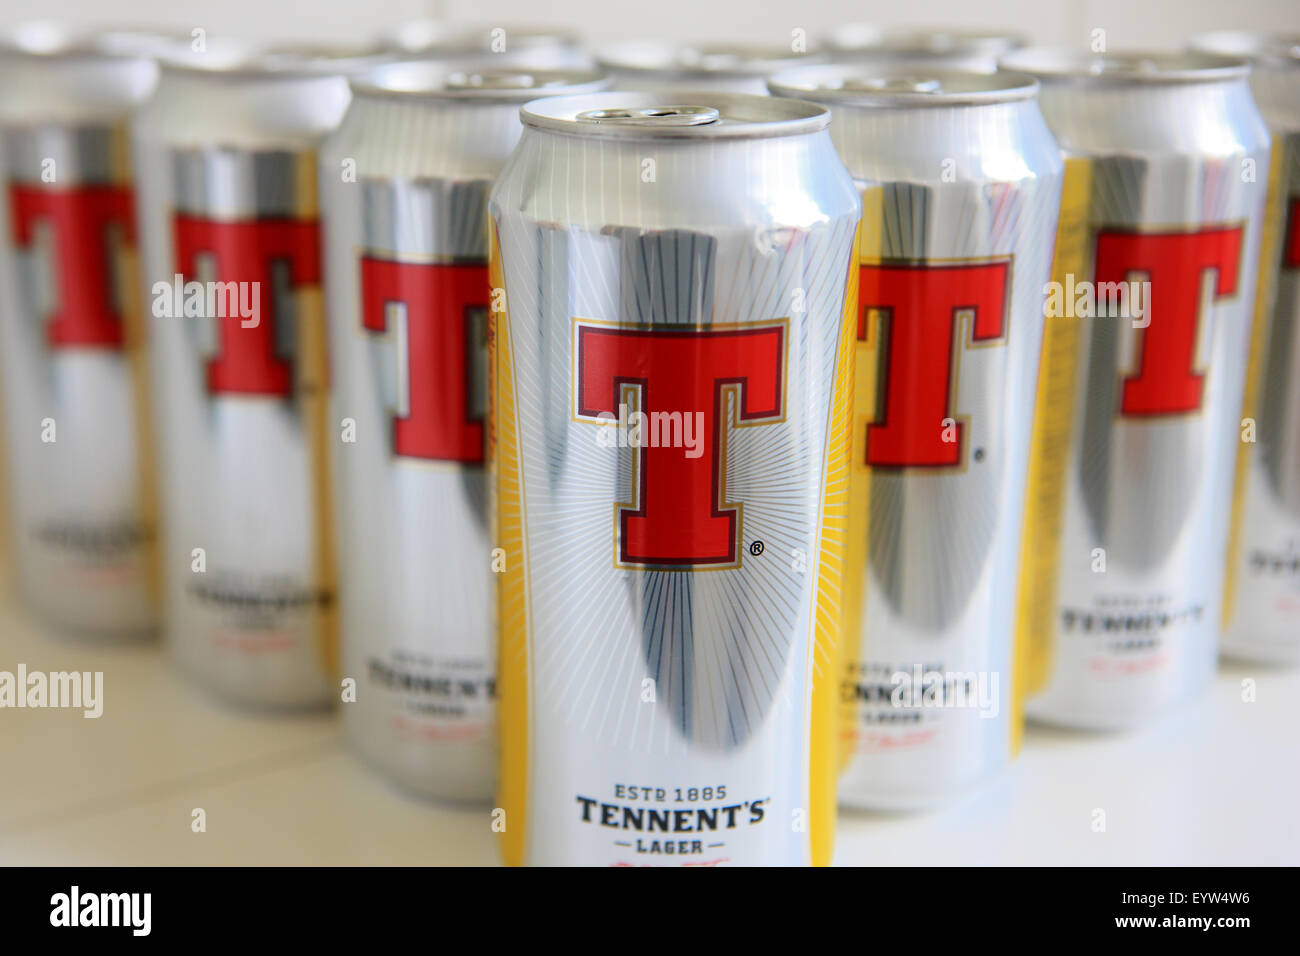 cans-of-tennents-lager-EYW4W6.jpg